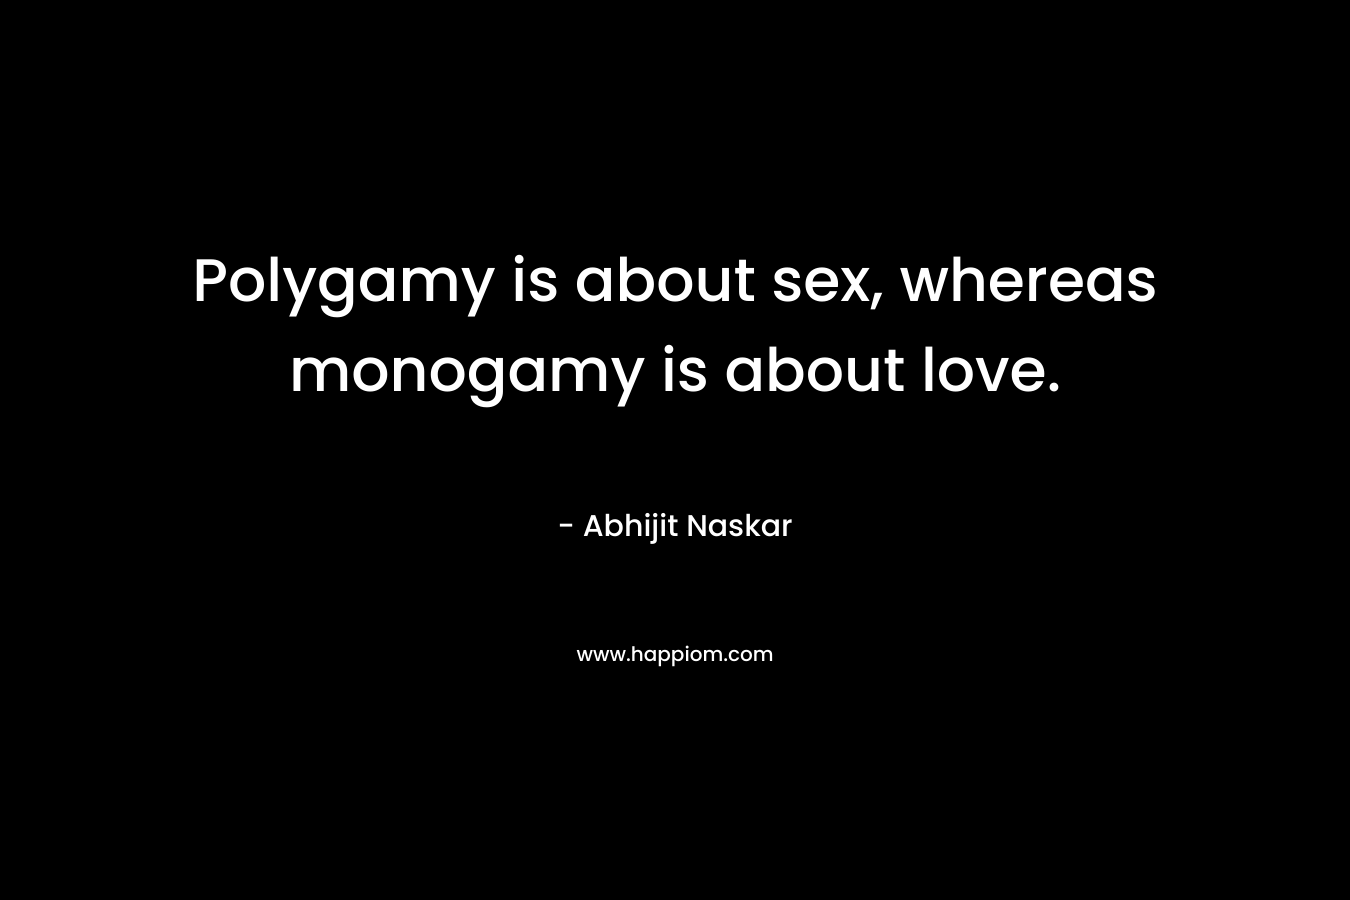 Polygamy is about sex, whereas monogamy is about love. – Abhijit Naskar